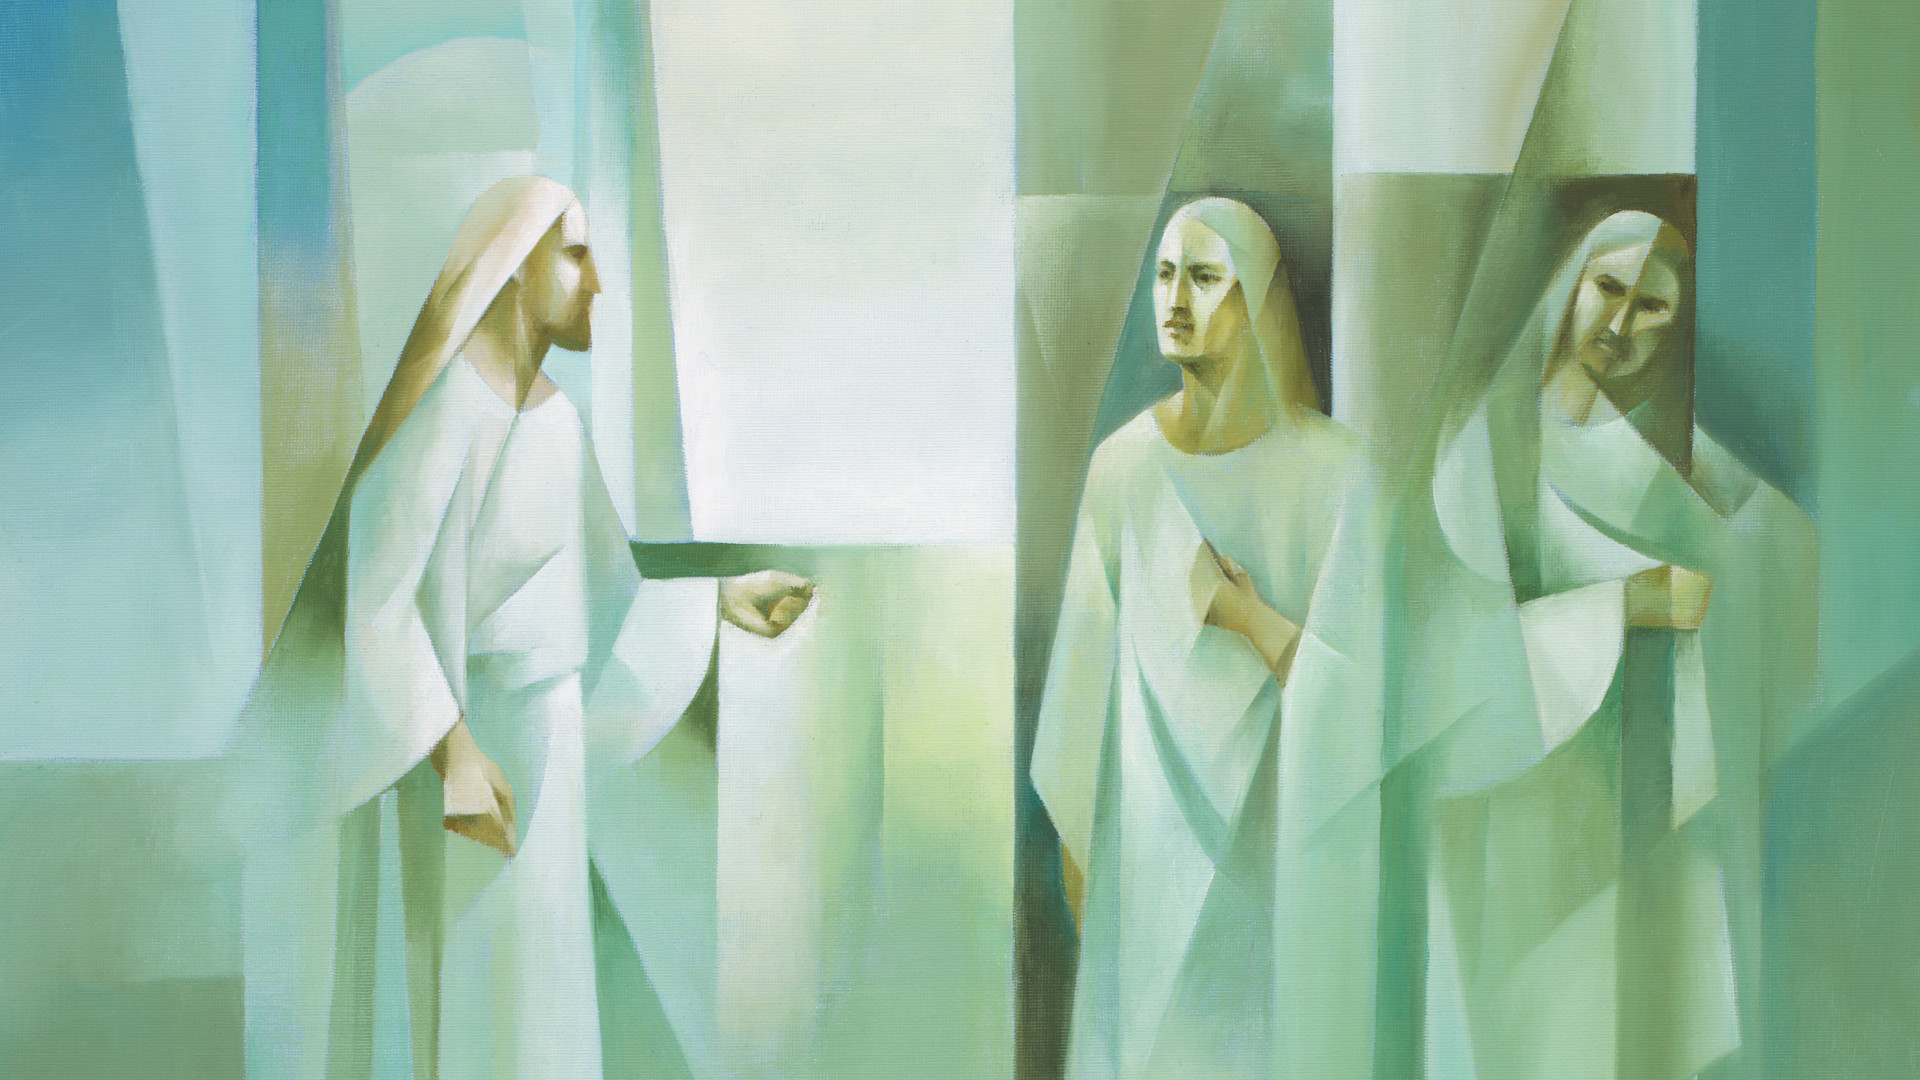 Jorge Cocco's painting, "The Father's Two Sons," depicts the two sons in the parable, representing Jesus Christ and Lucifer.